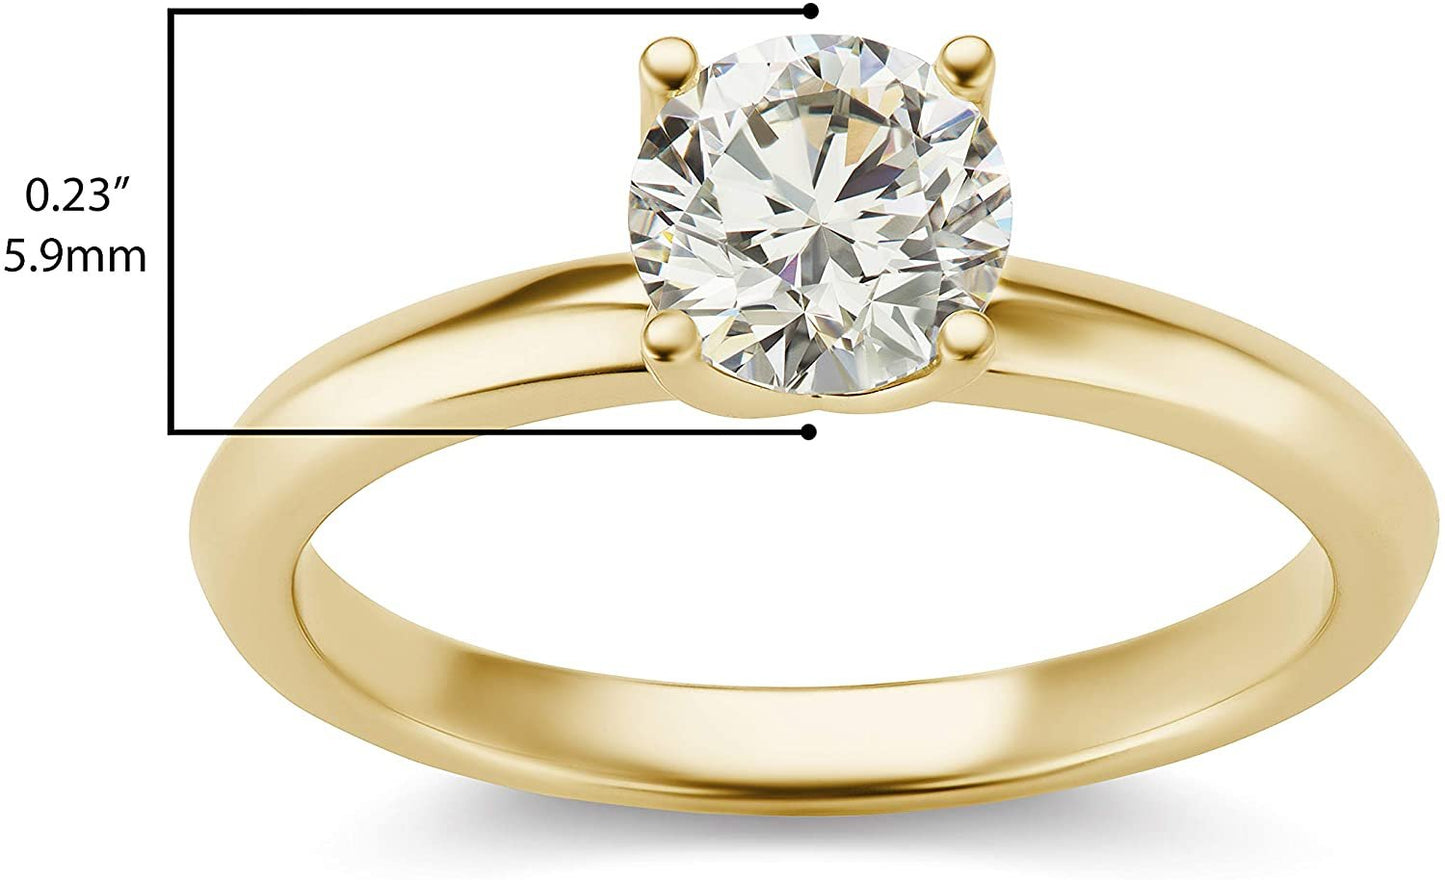 IGI Certified 3/4 Carat Round Brilliant-Cut Lab Created Diamond 14K Gold Classic 4-Prong Solitaire Engagement Ring (G-H Color, VS1-VS2 Clarity) - 14K Yellow Gold, Size 5